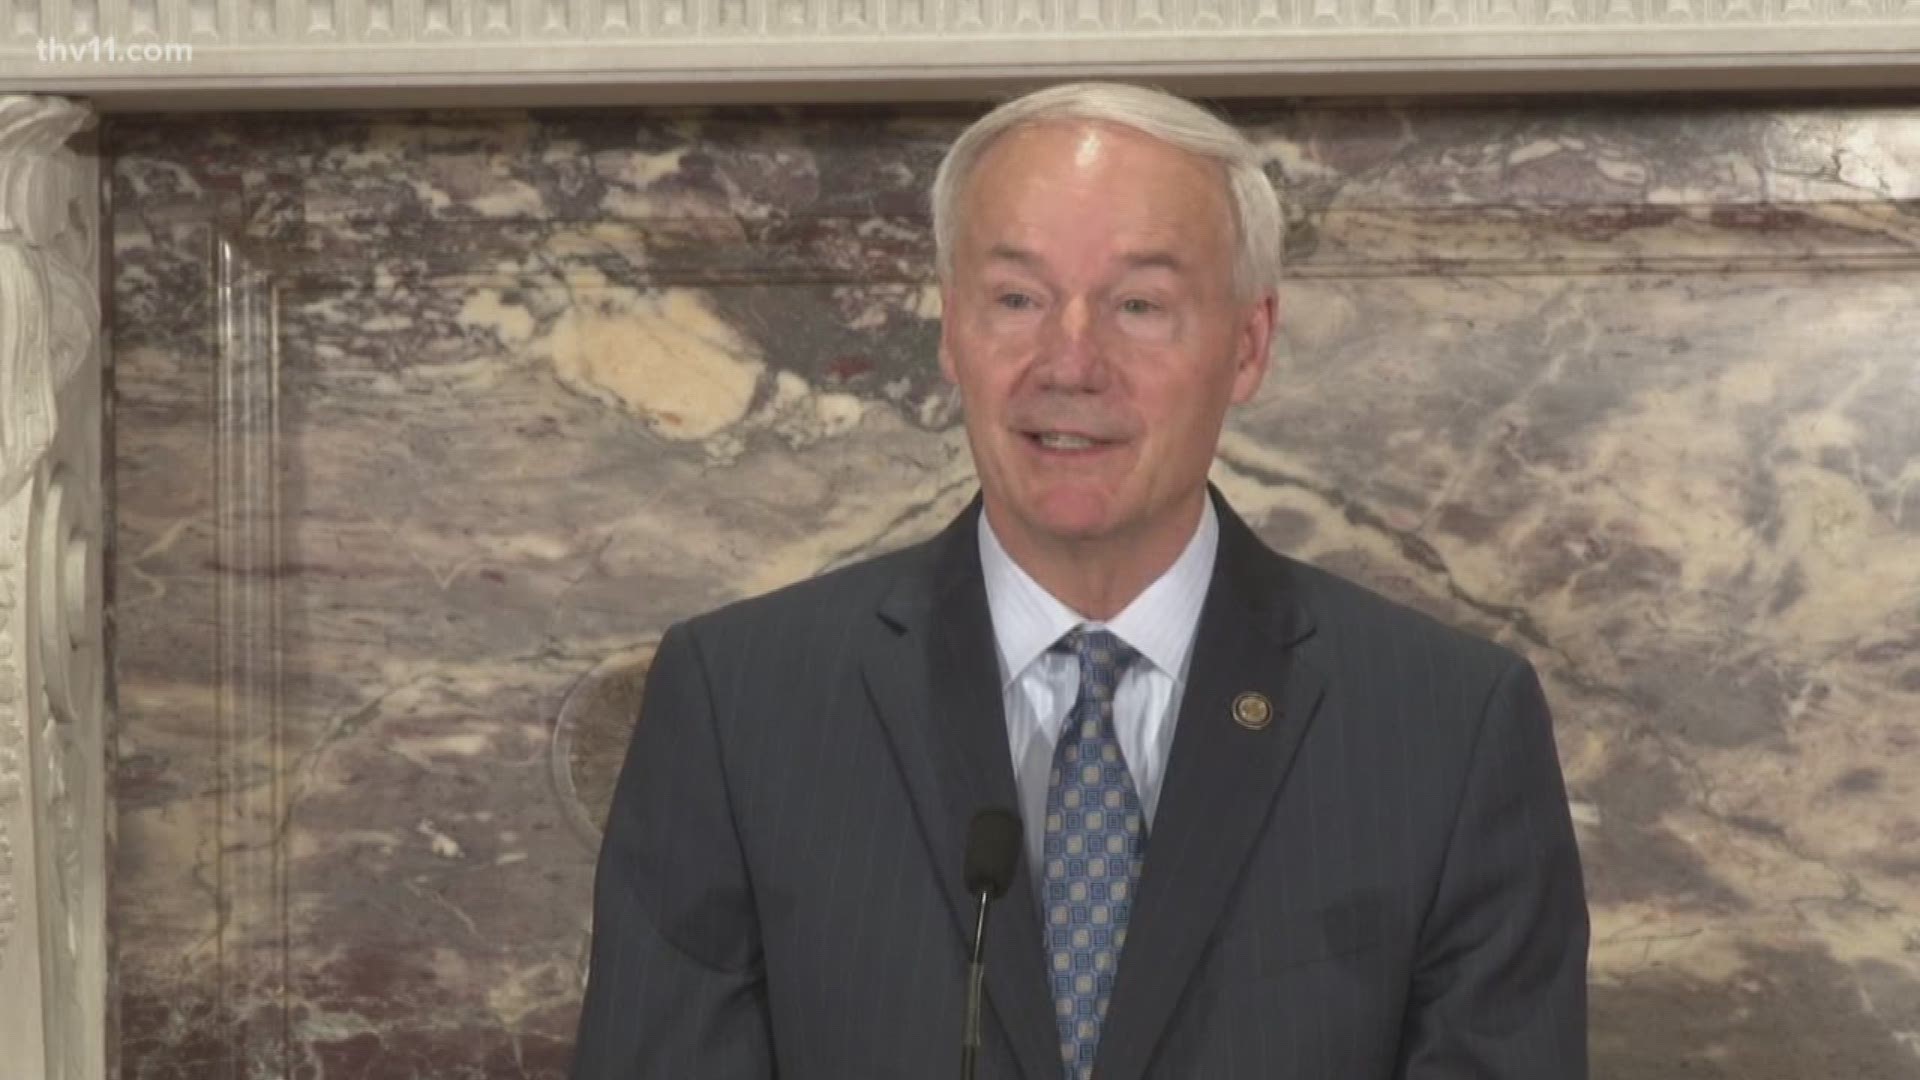 Governor Asa Hutchinson announcing the infusion of block-grant funds. The money came from the two-year budget deal reached in Congress and signed by President Trump.